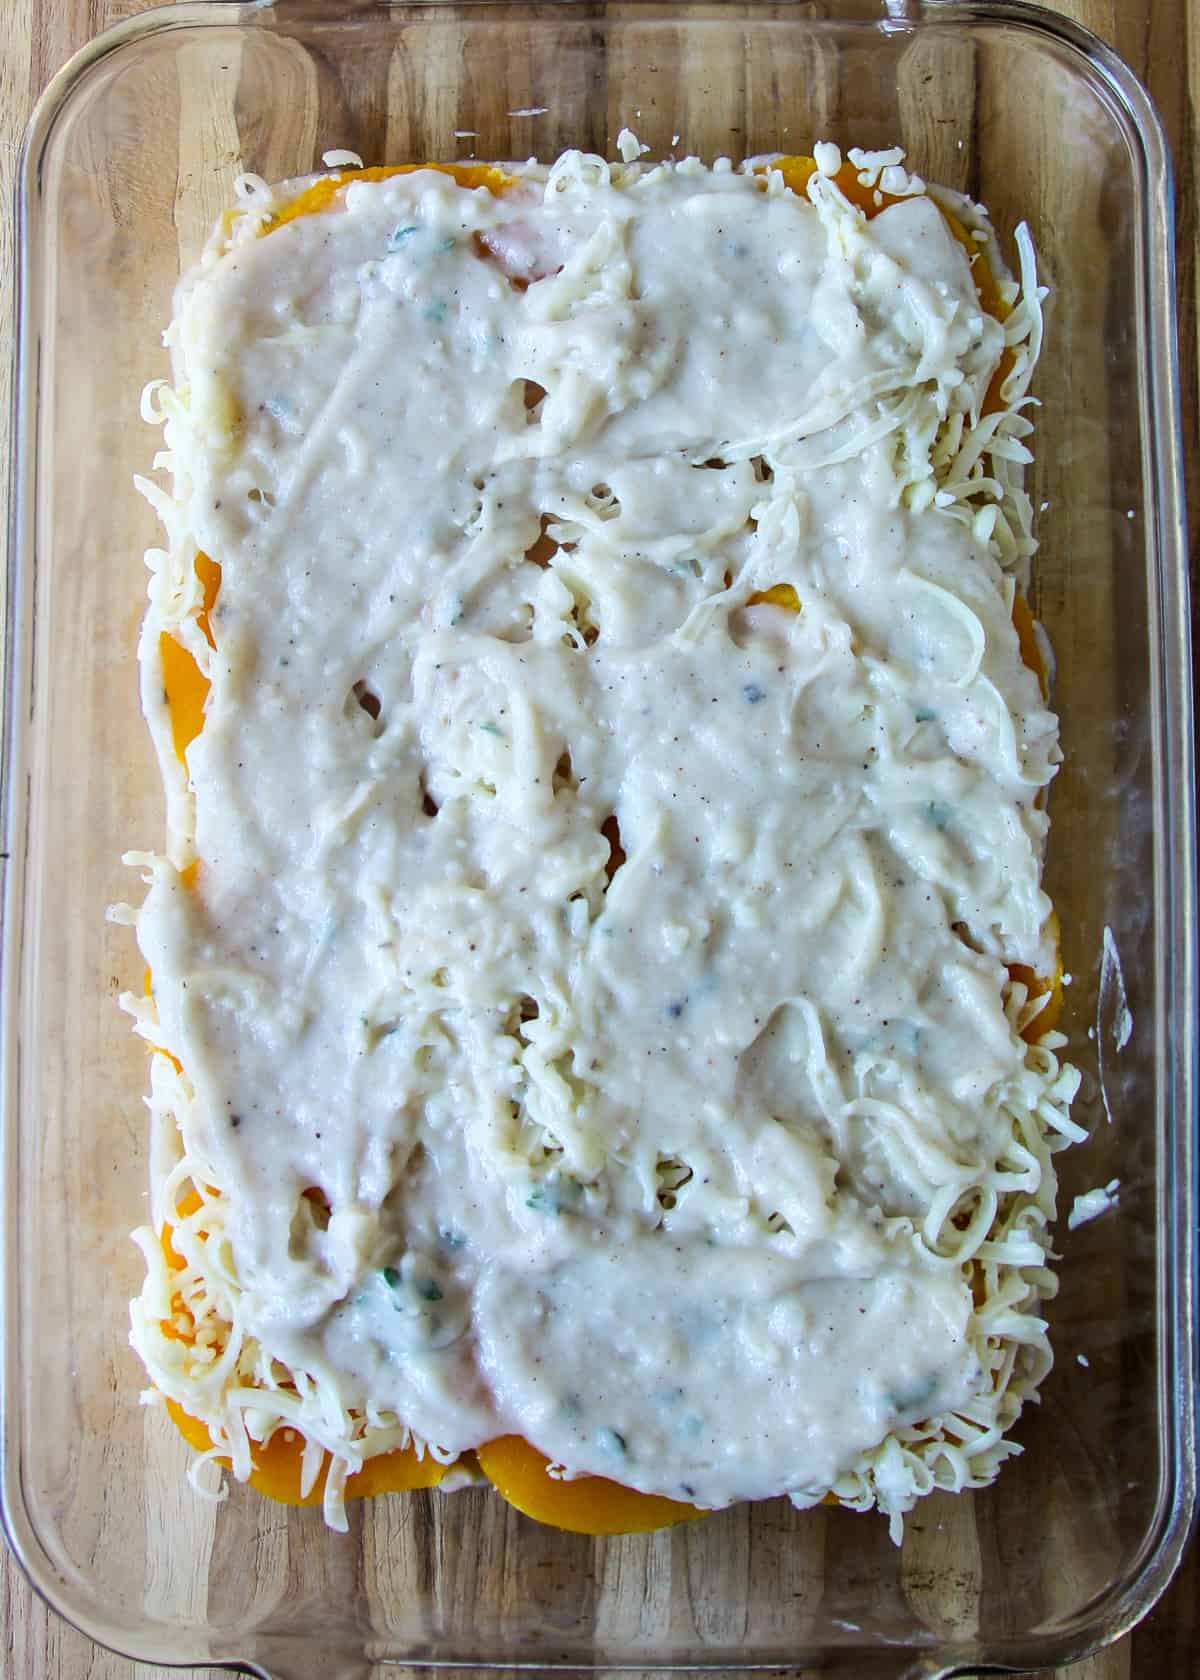 Bechamel sauce spread over squash and cheese in lasagna dish.